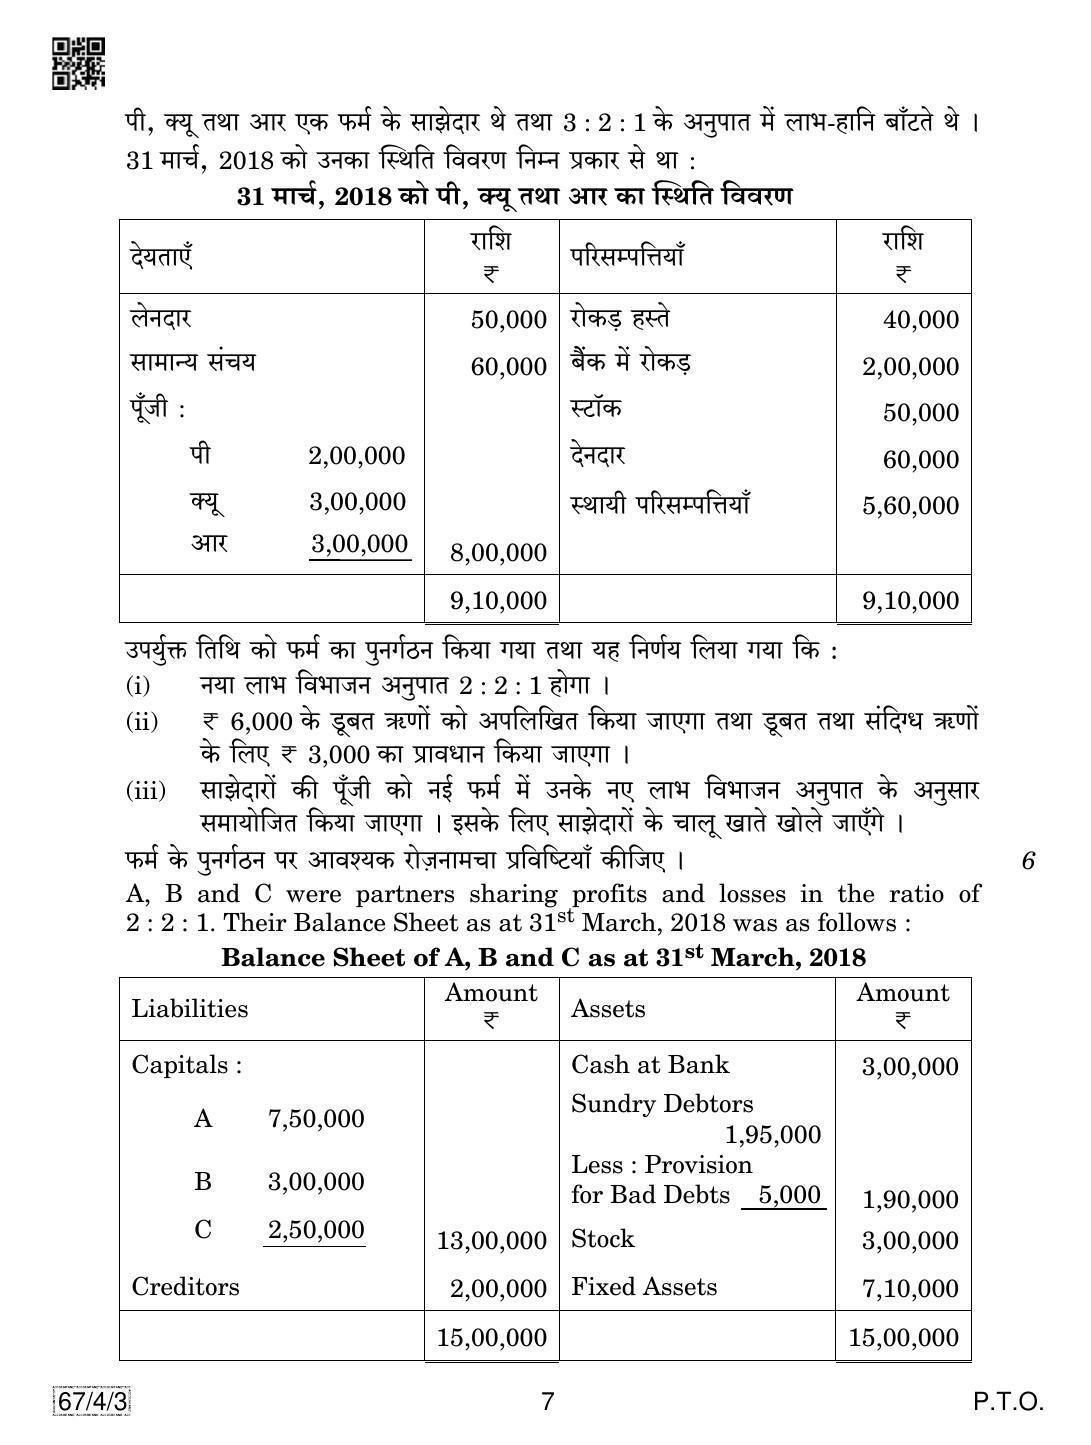 CBSE Class 12 67-4-3 Accountancy 2019 Question Paper - Page 7